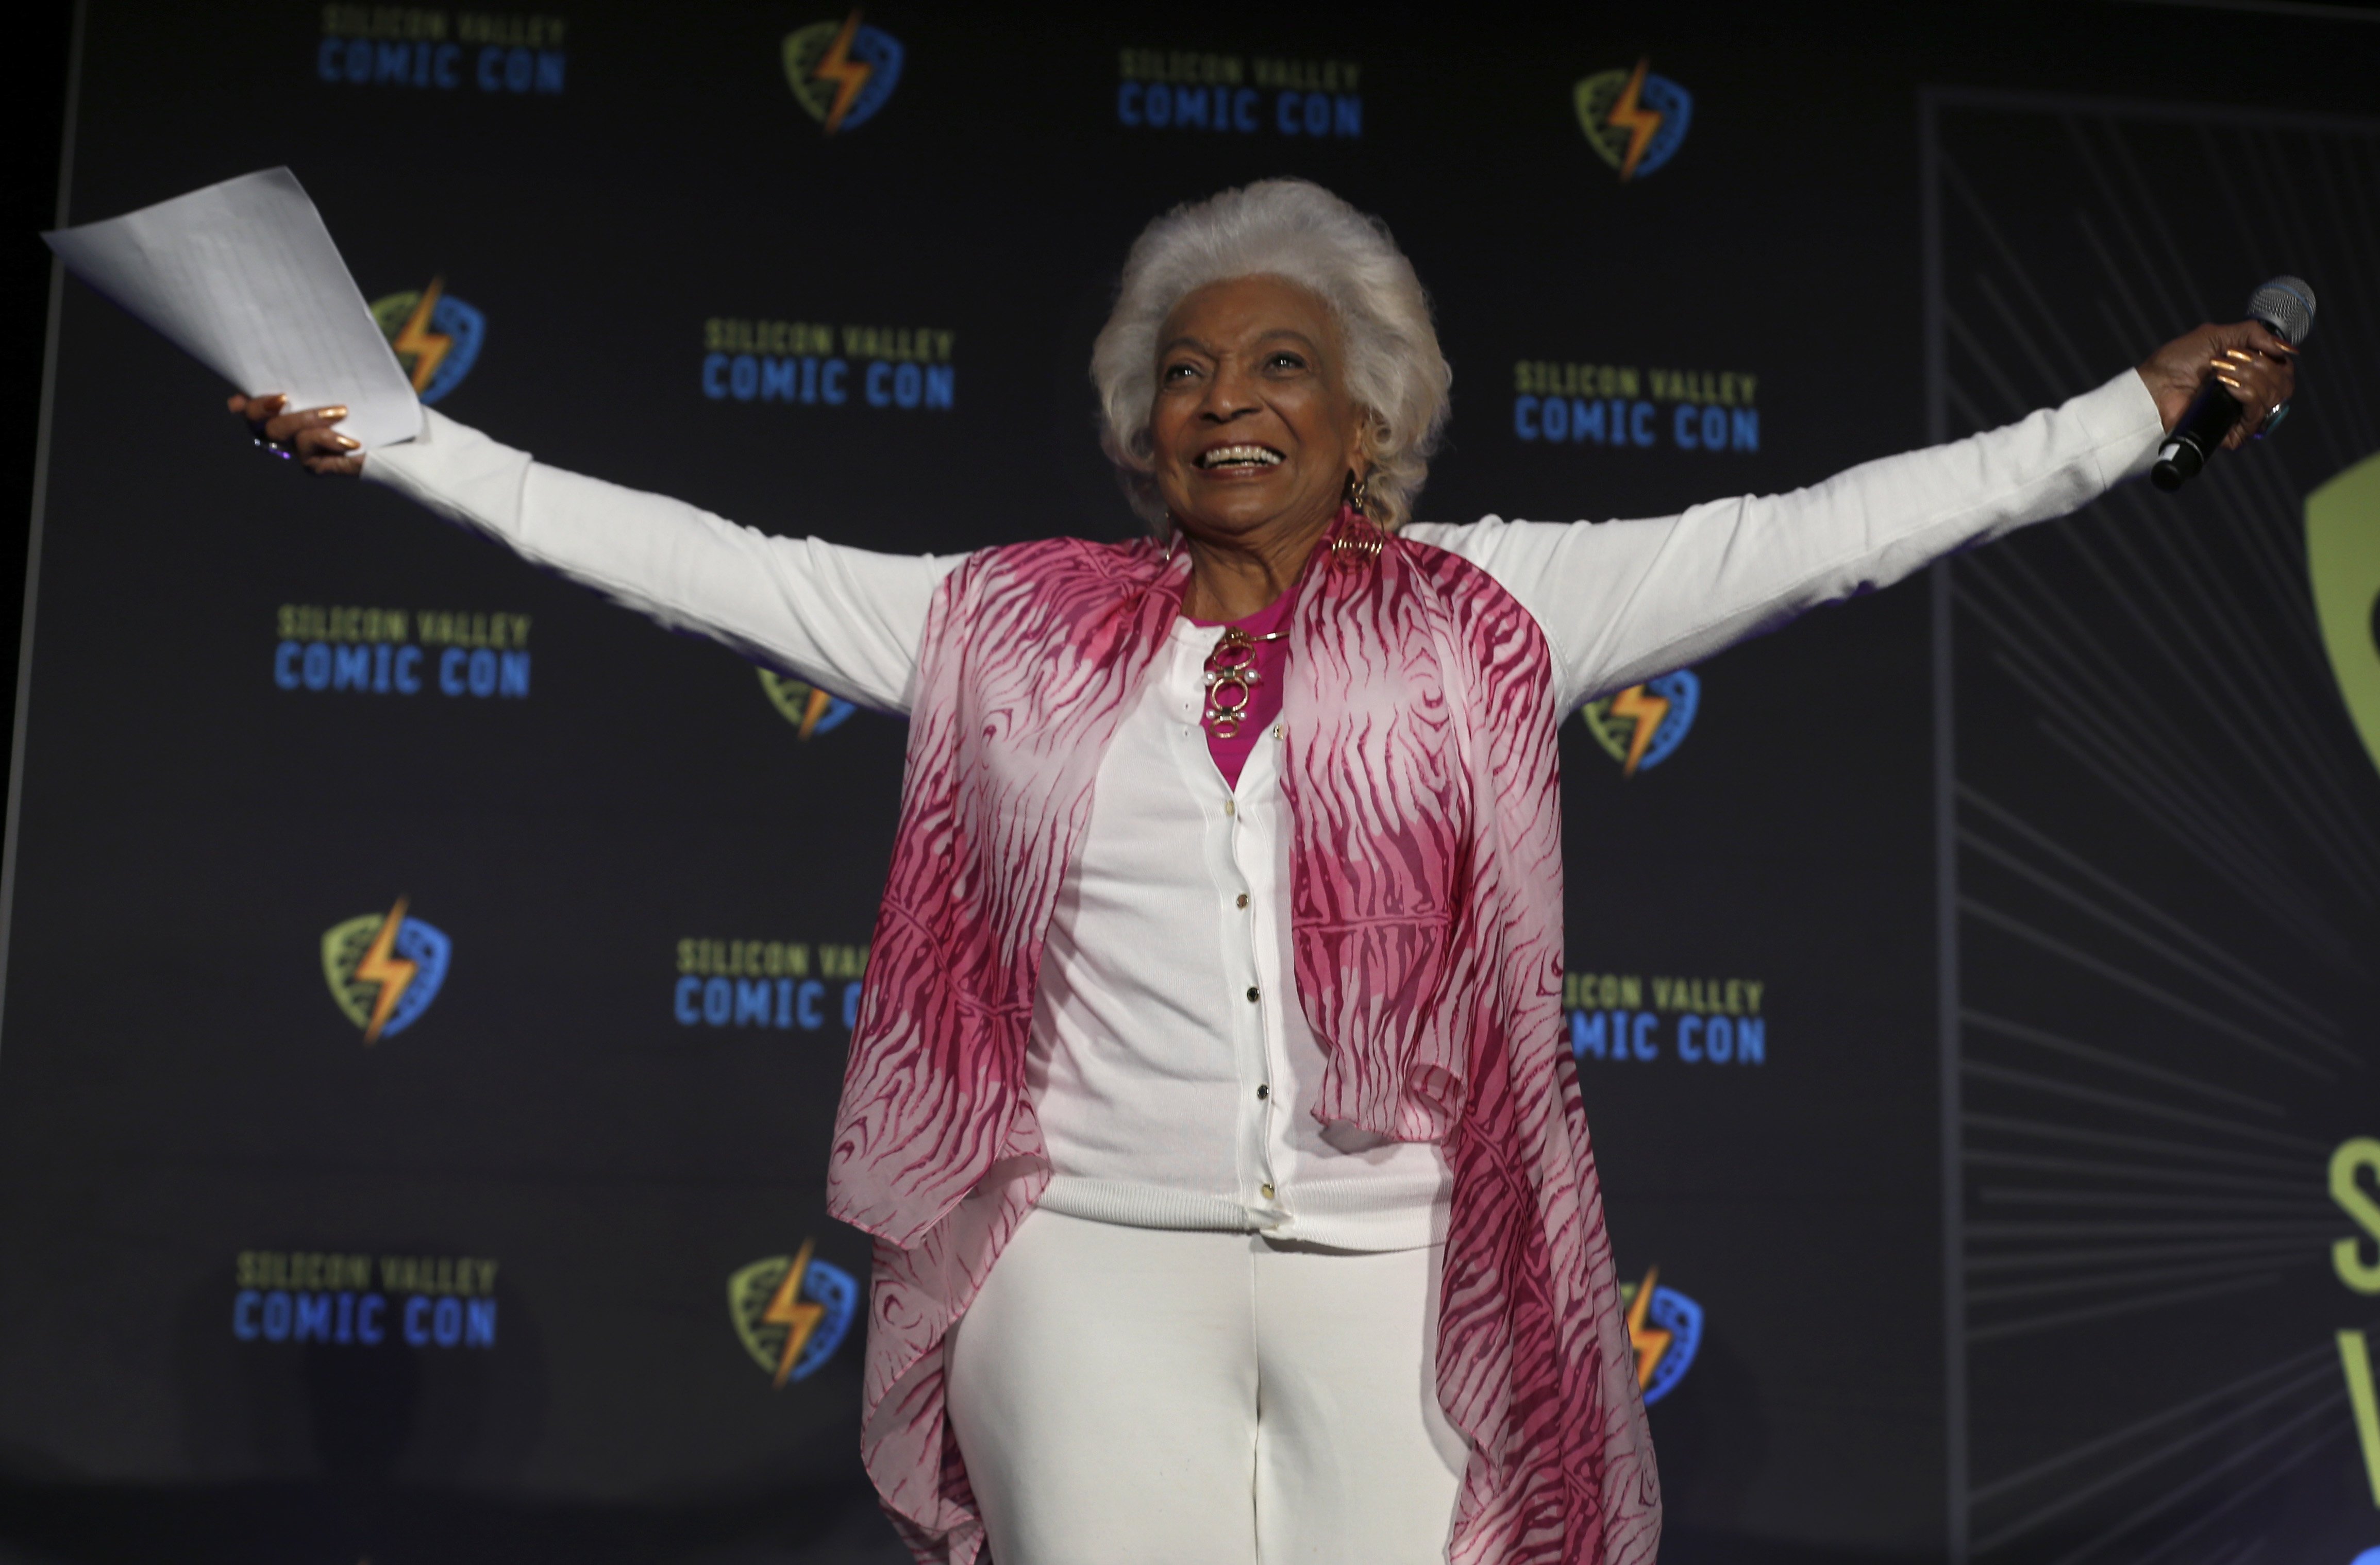 Actress Nichelle Nichols, who portrayed Lt. Uhura in the original Star Trek series introducing NASA astronaut Dr. Mae Jemison at the Silicon Valley Comic Con in San Jose, Calif. on Saturday, April 7, 2018. | Source: Getty Images 